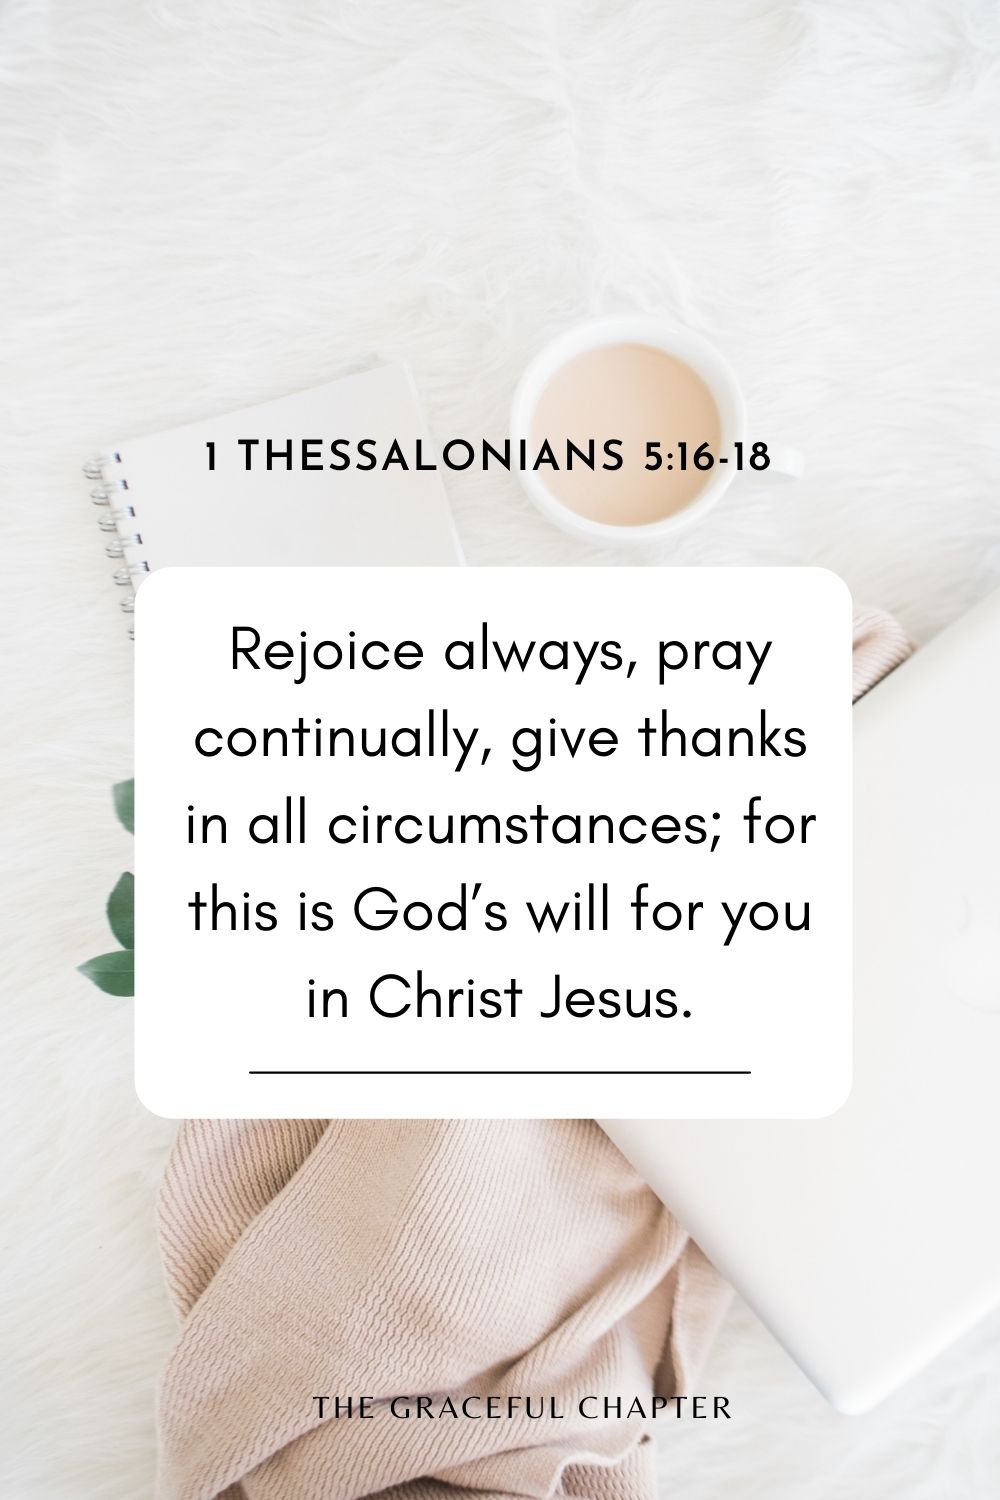 Rejoice always, pray continually, give thanks in all circumstances; for this is God’s will for you in Christ Jesus. 1 Thessalonians 5:16-18